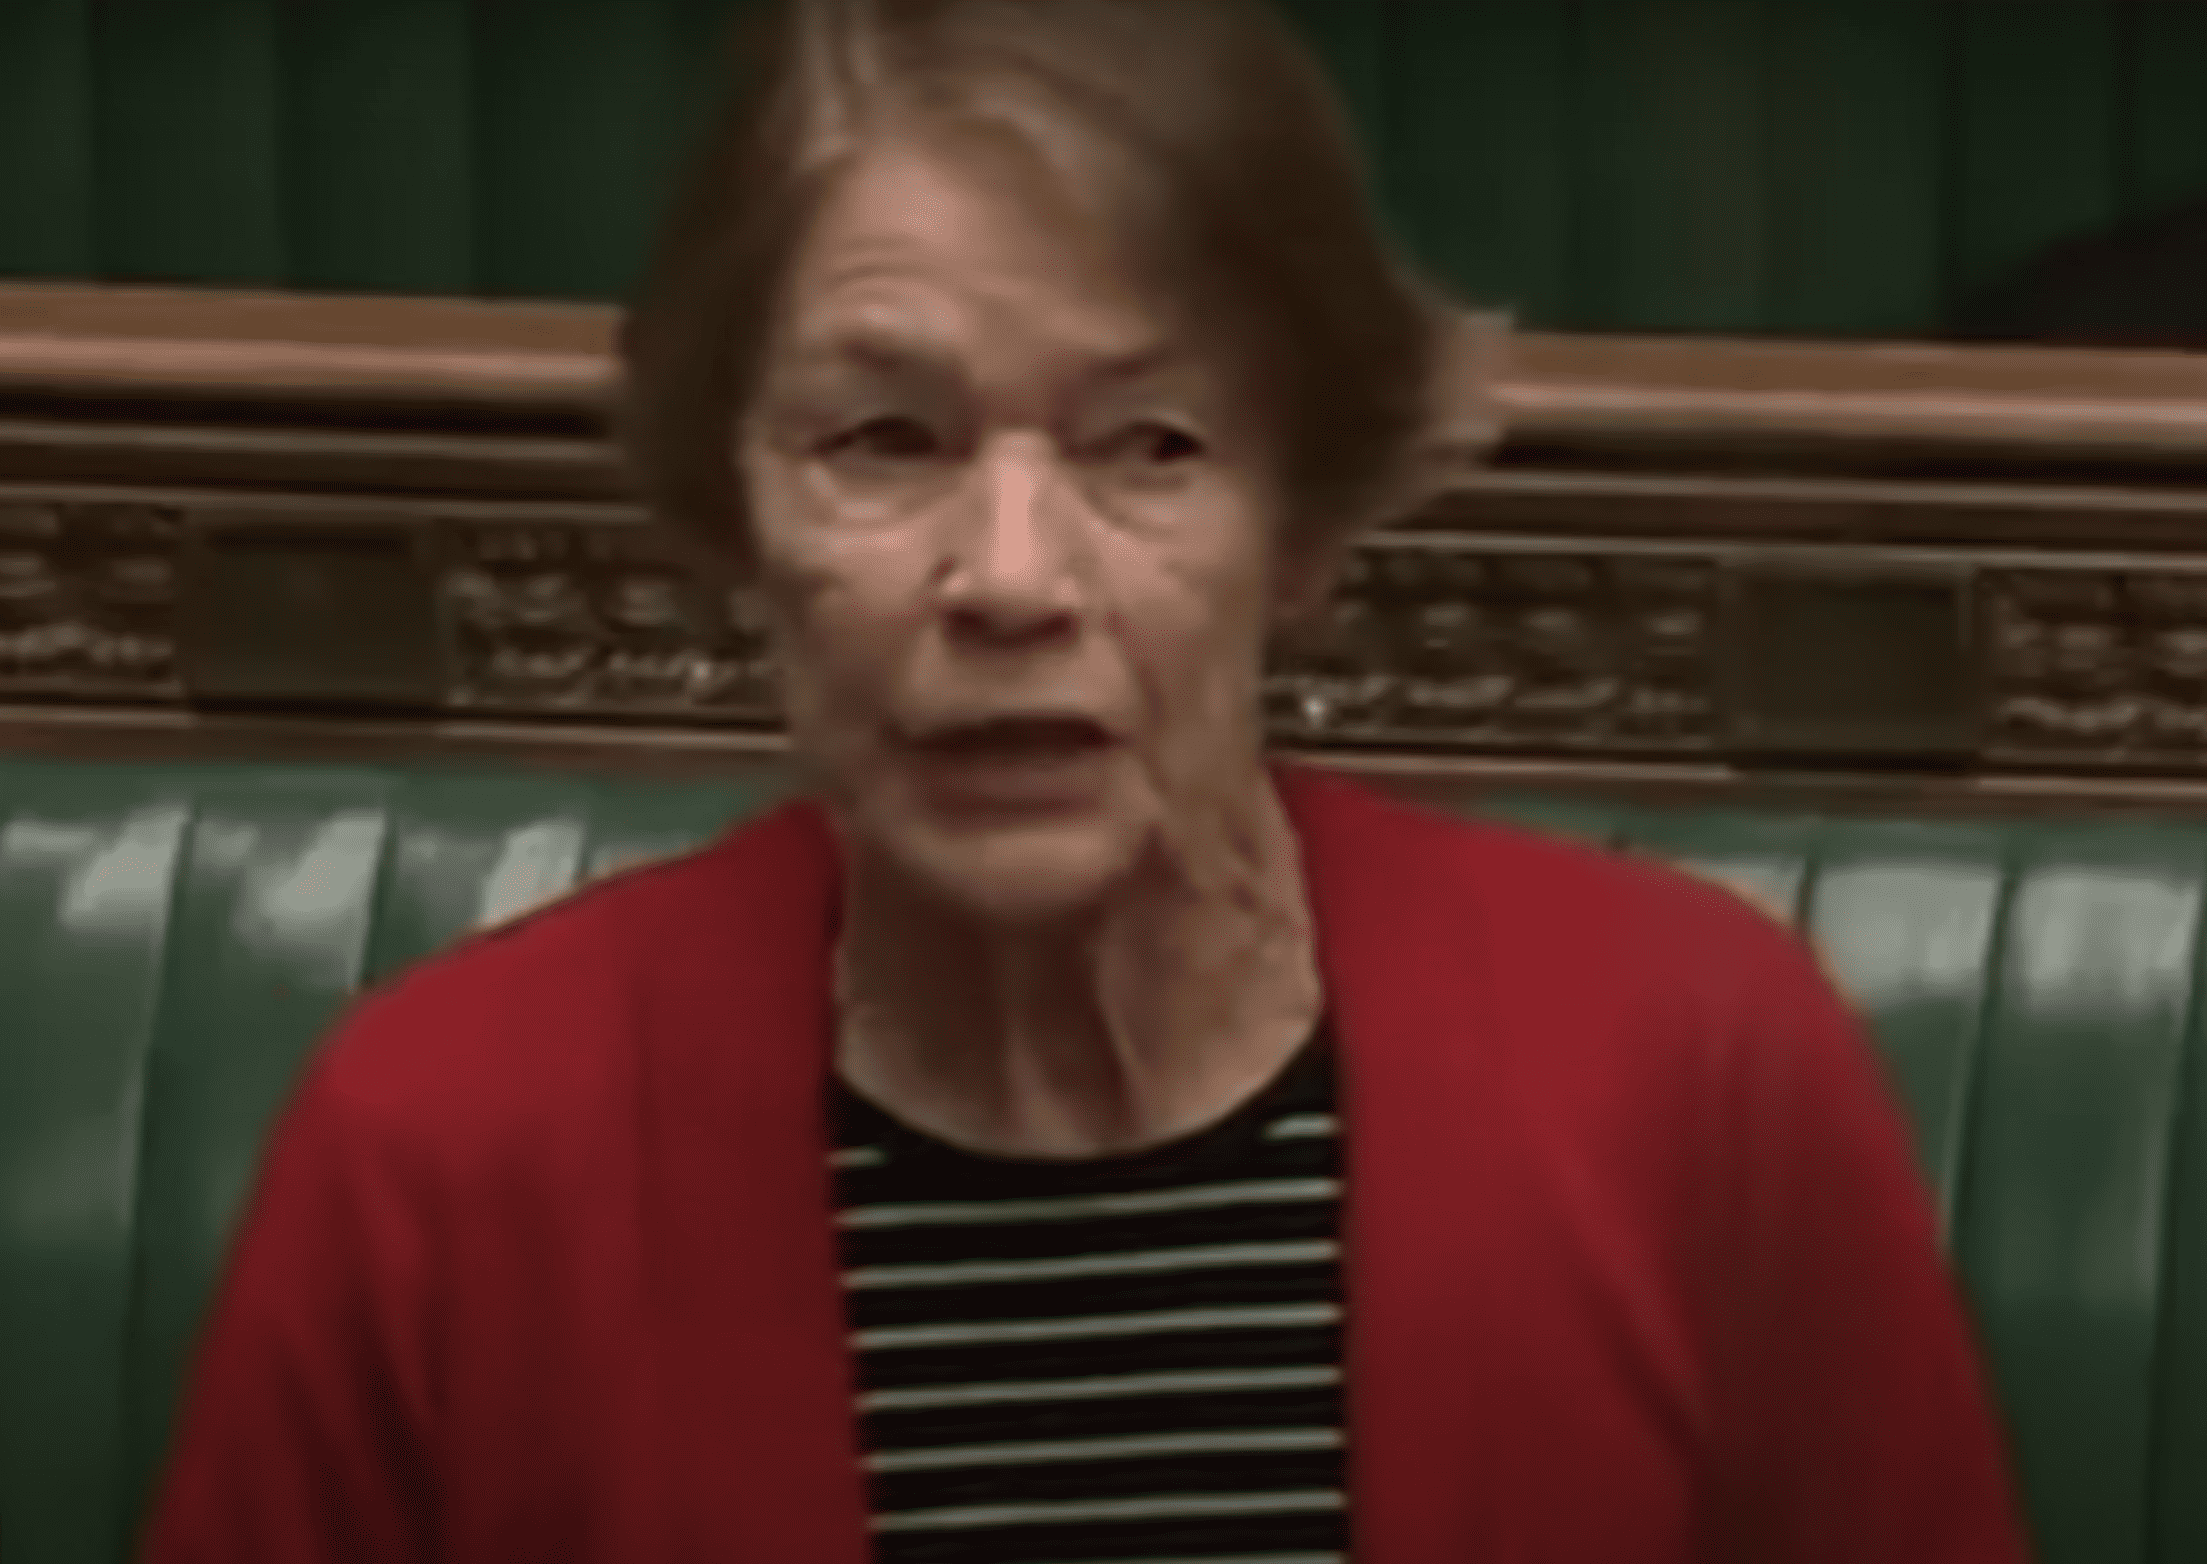 Labour MP who went against the grain during Commons tributes to Thatcher goes viral